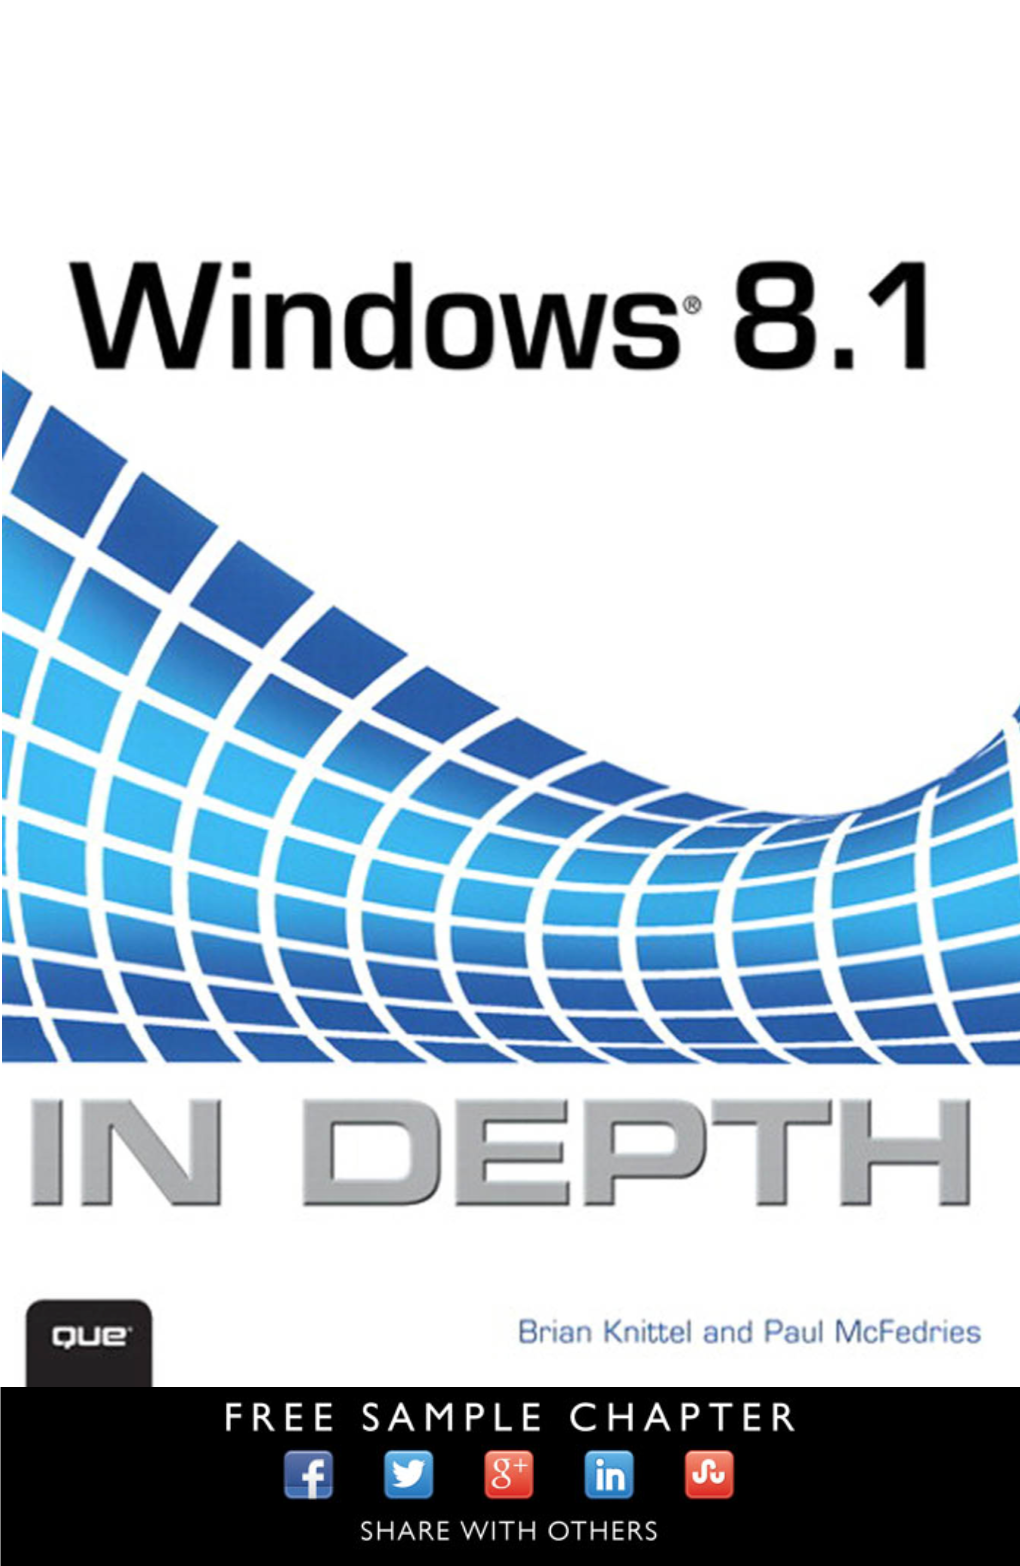 WINDOWS® 8.1 in DEPTH Copyright © 2014 by Pearson Education, Inc